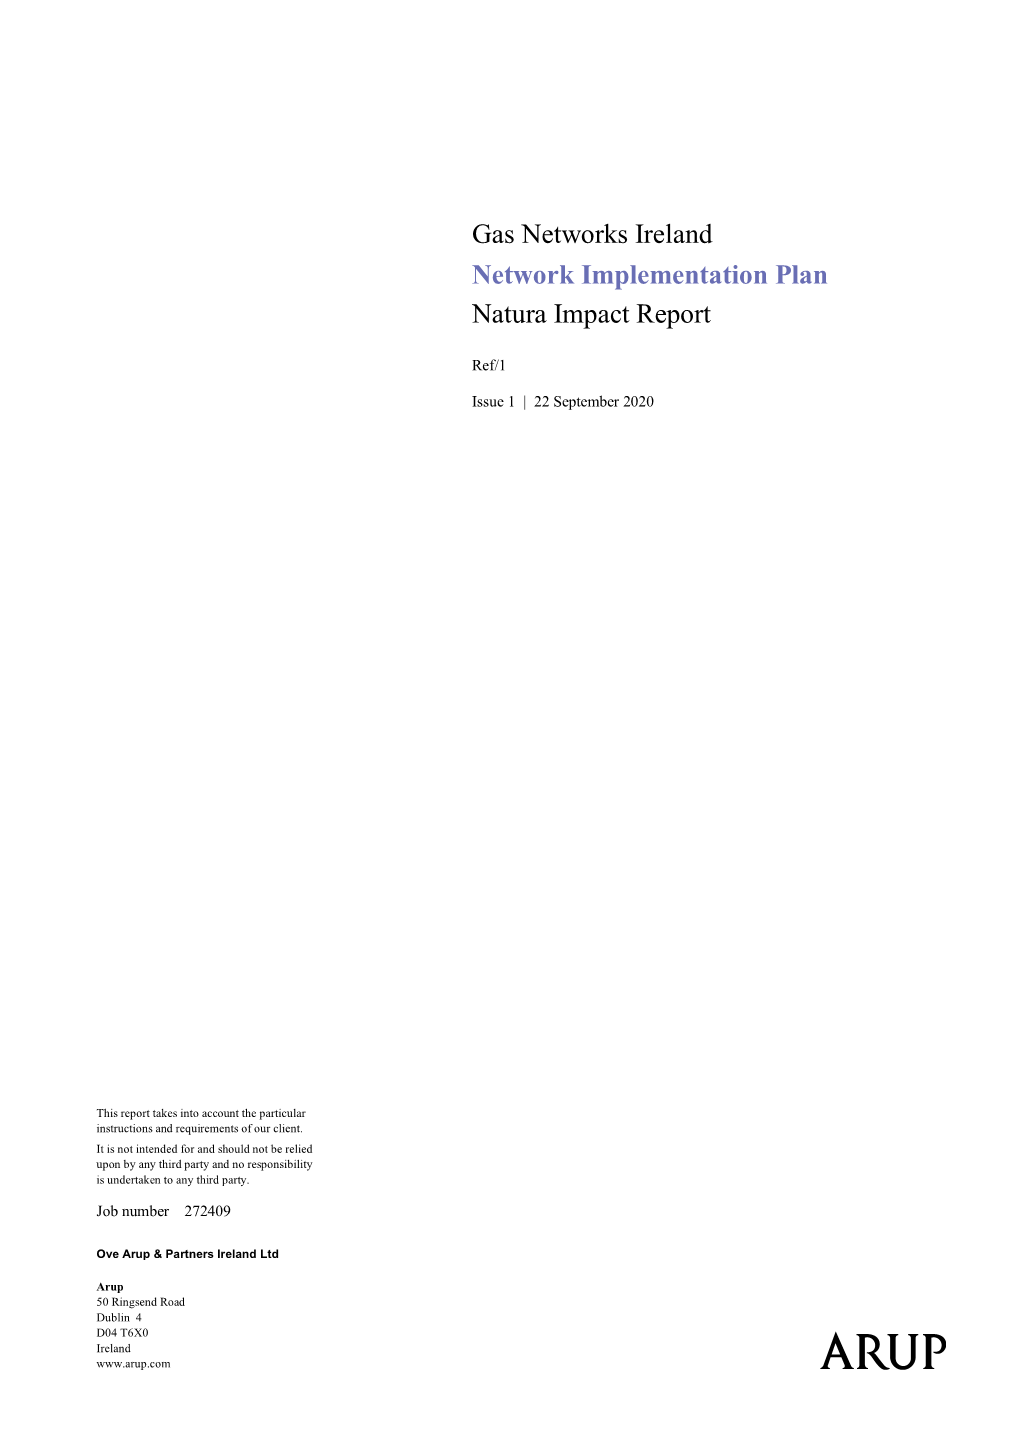 Gas Networks Ireland Network Implementation Plan Natura Impact Report